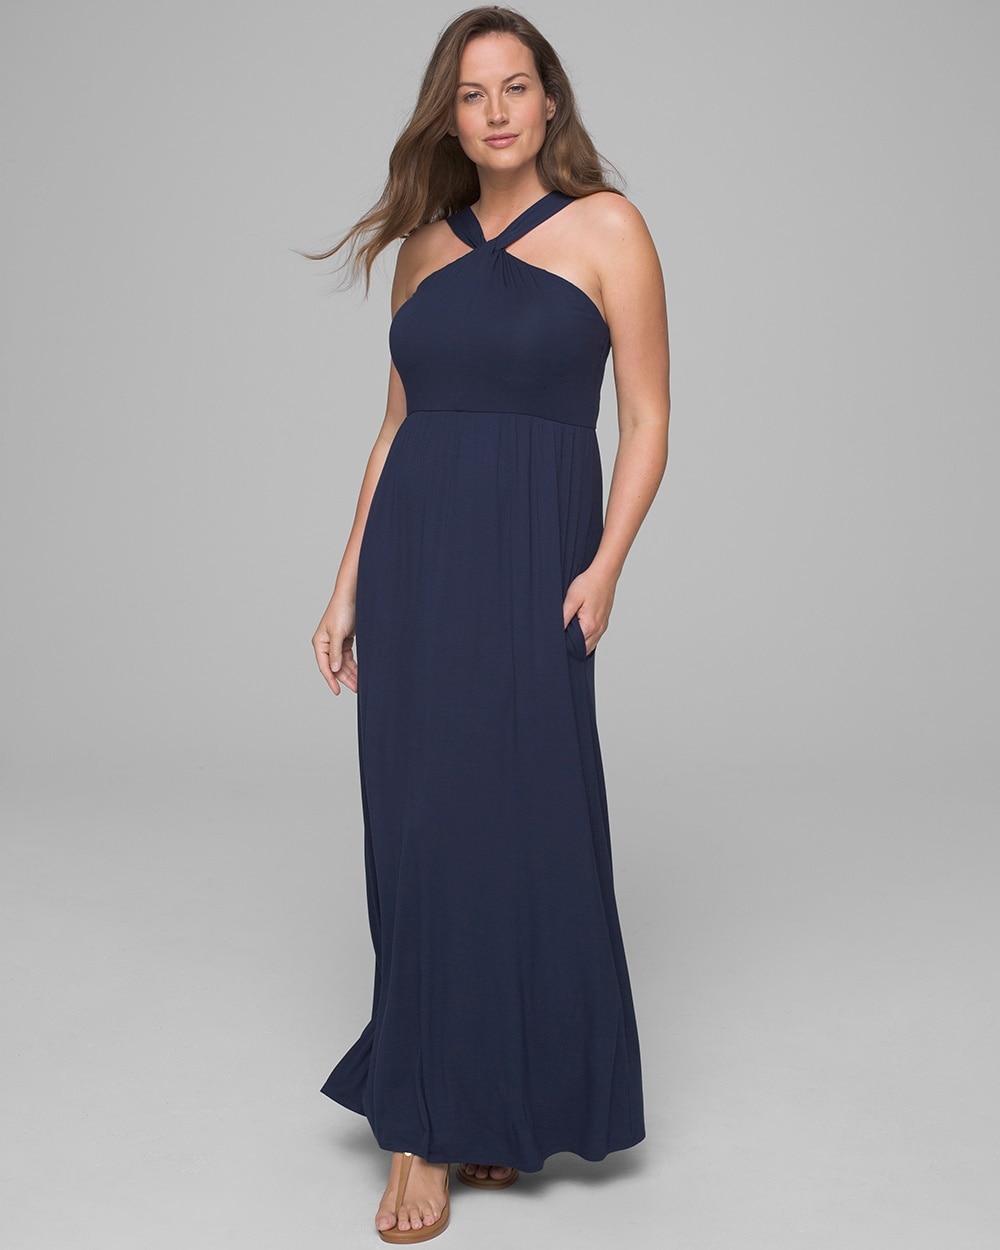 Halter Knot Maxi Dress with Built-In Bra